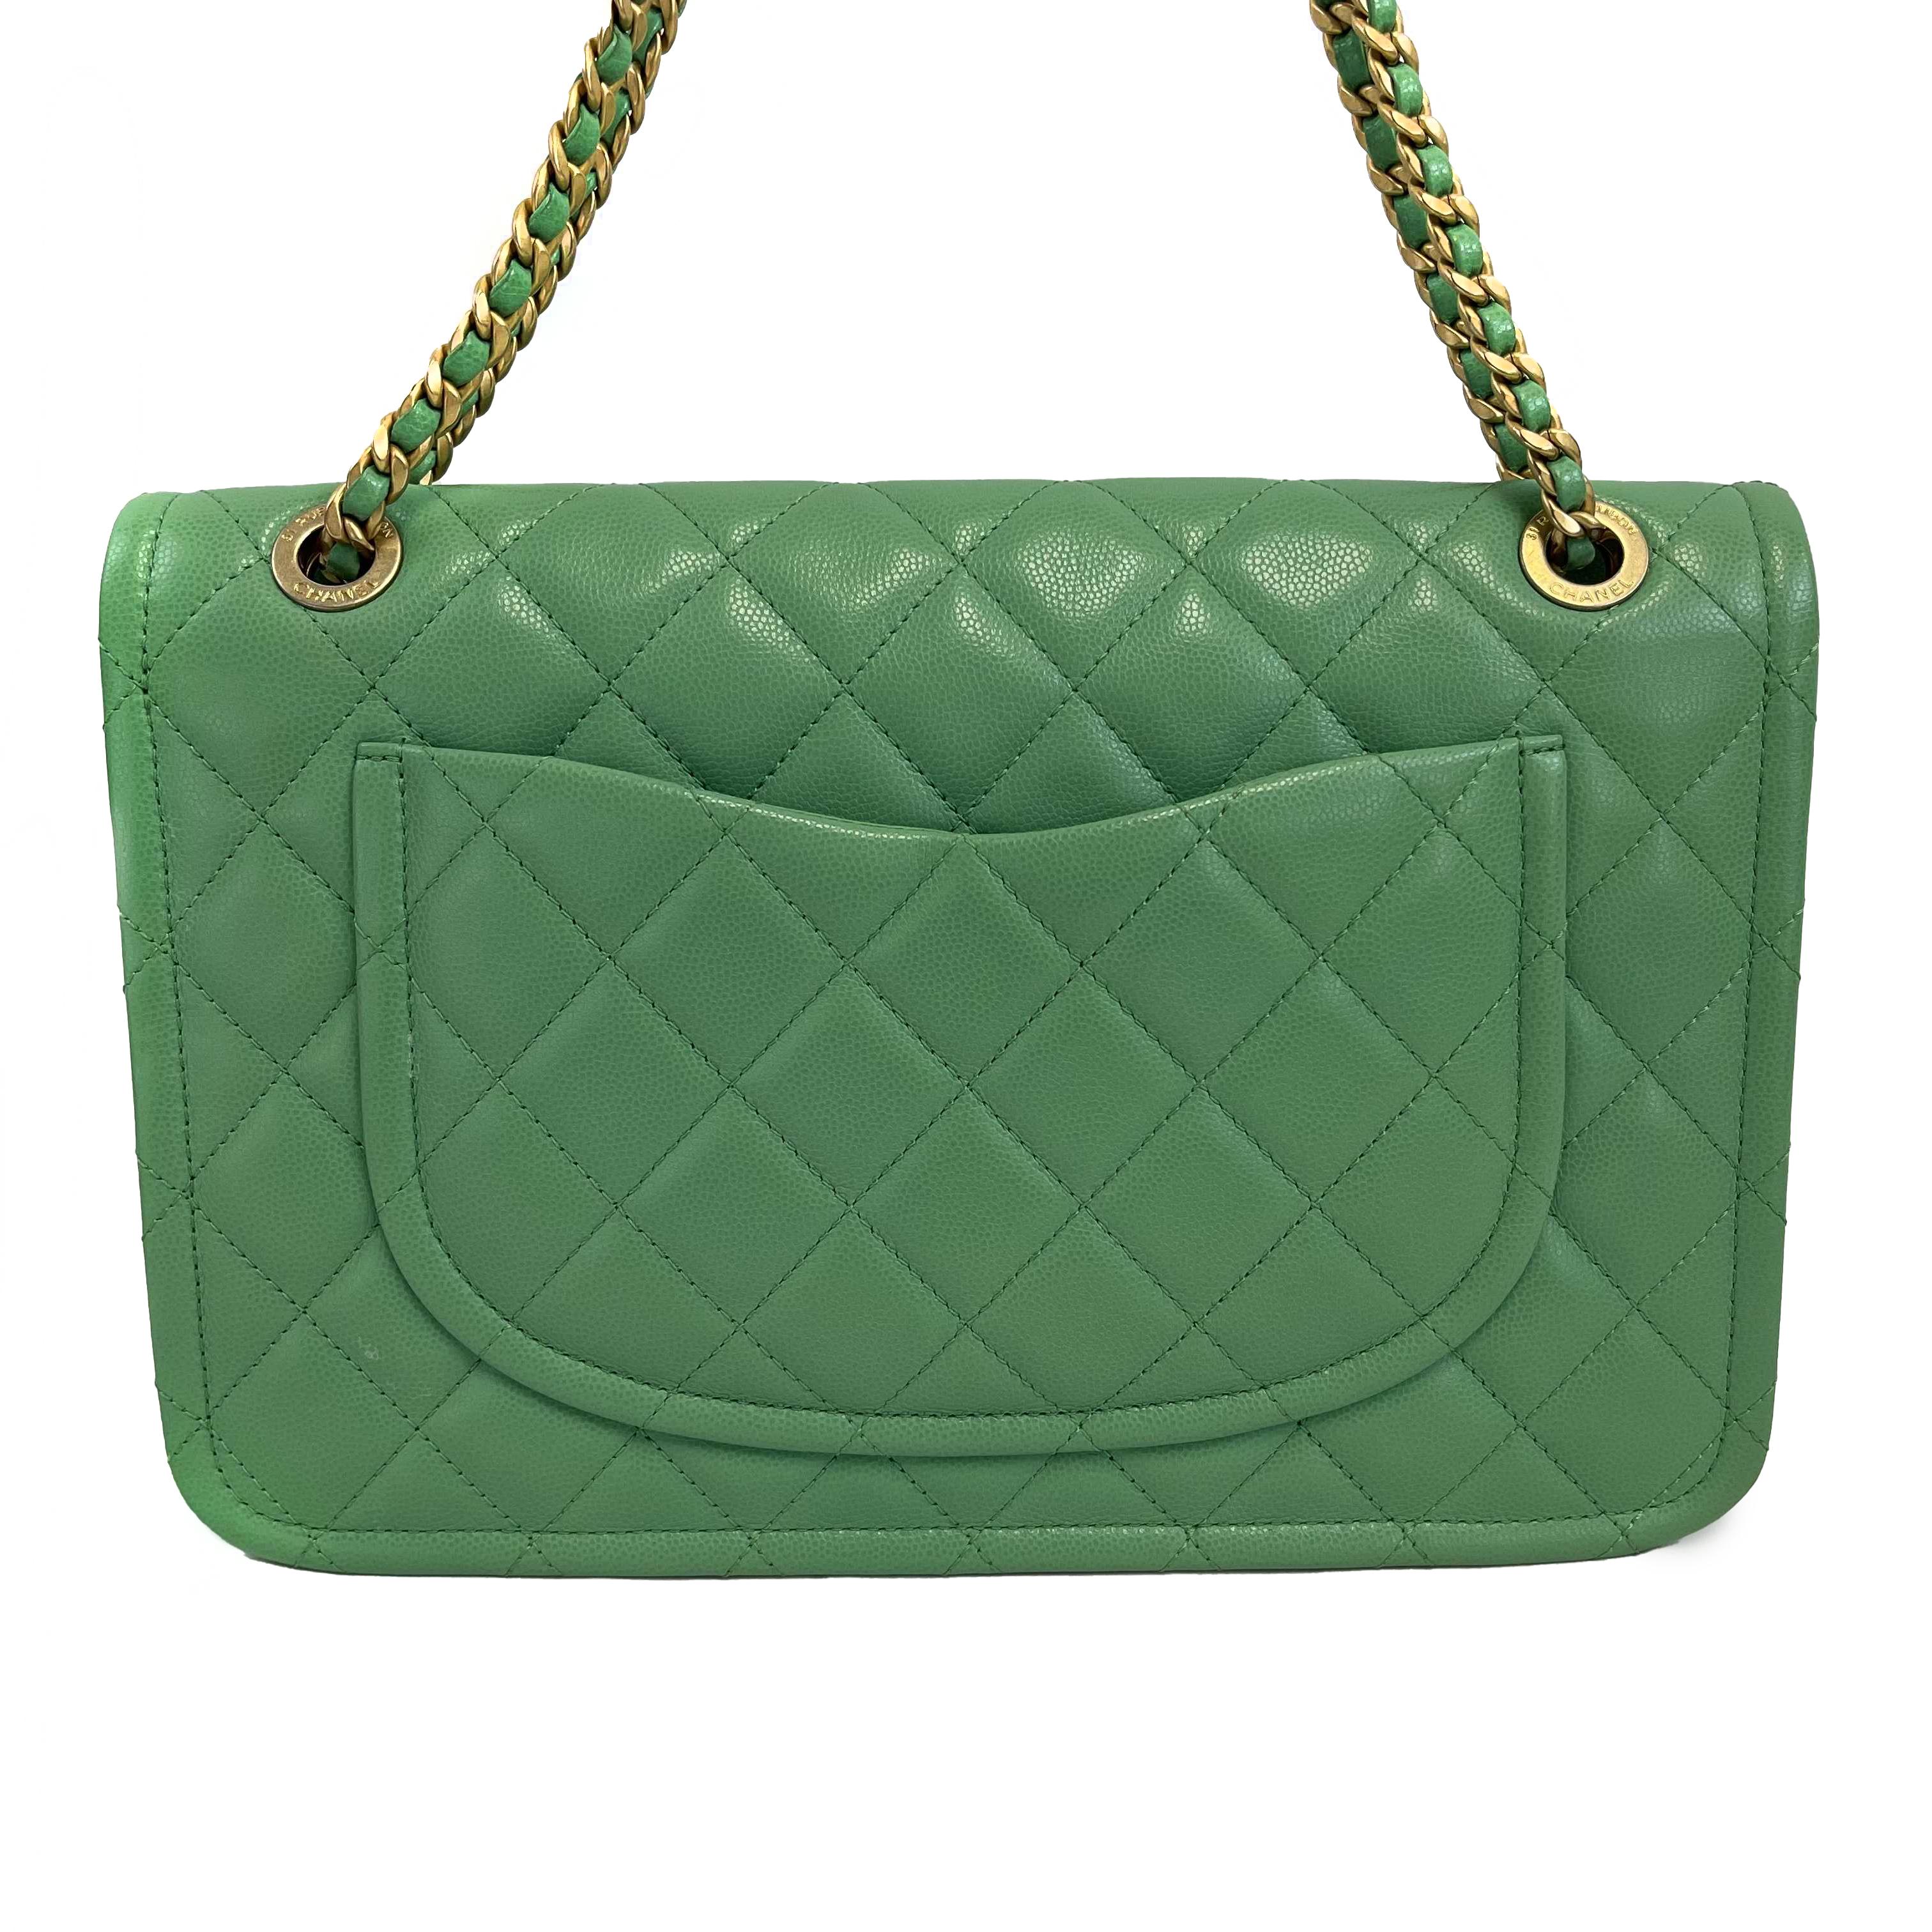 	CHANEL - 2021 CC Medium Diamond Caviar Leather Mint Green Sweet Single Flap In Excellent Condition For Sale In Sanford, FL